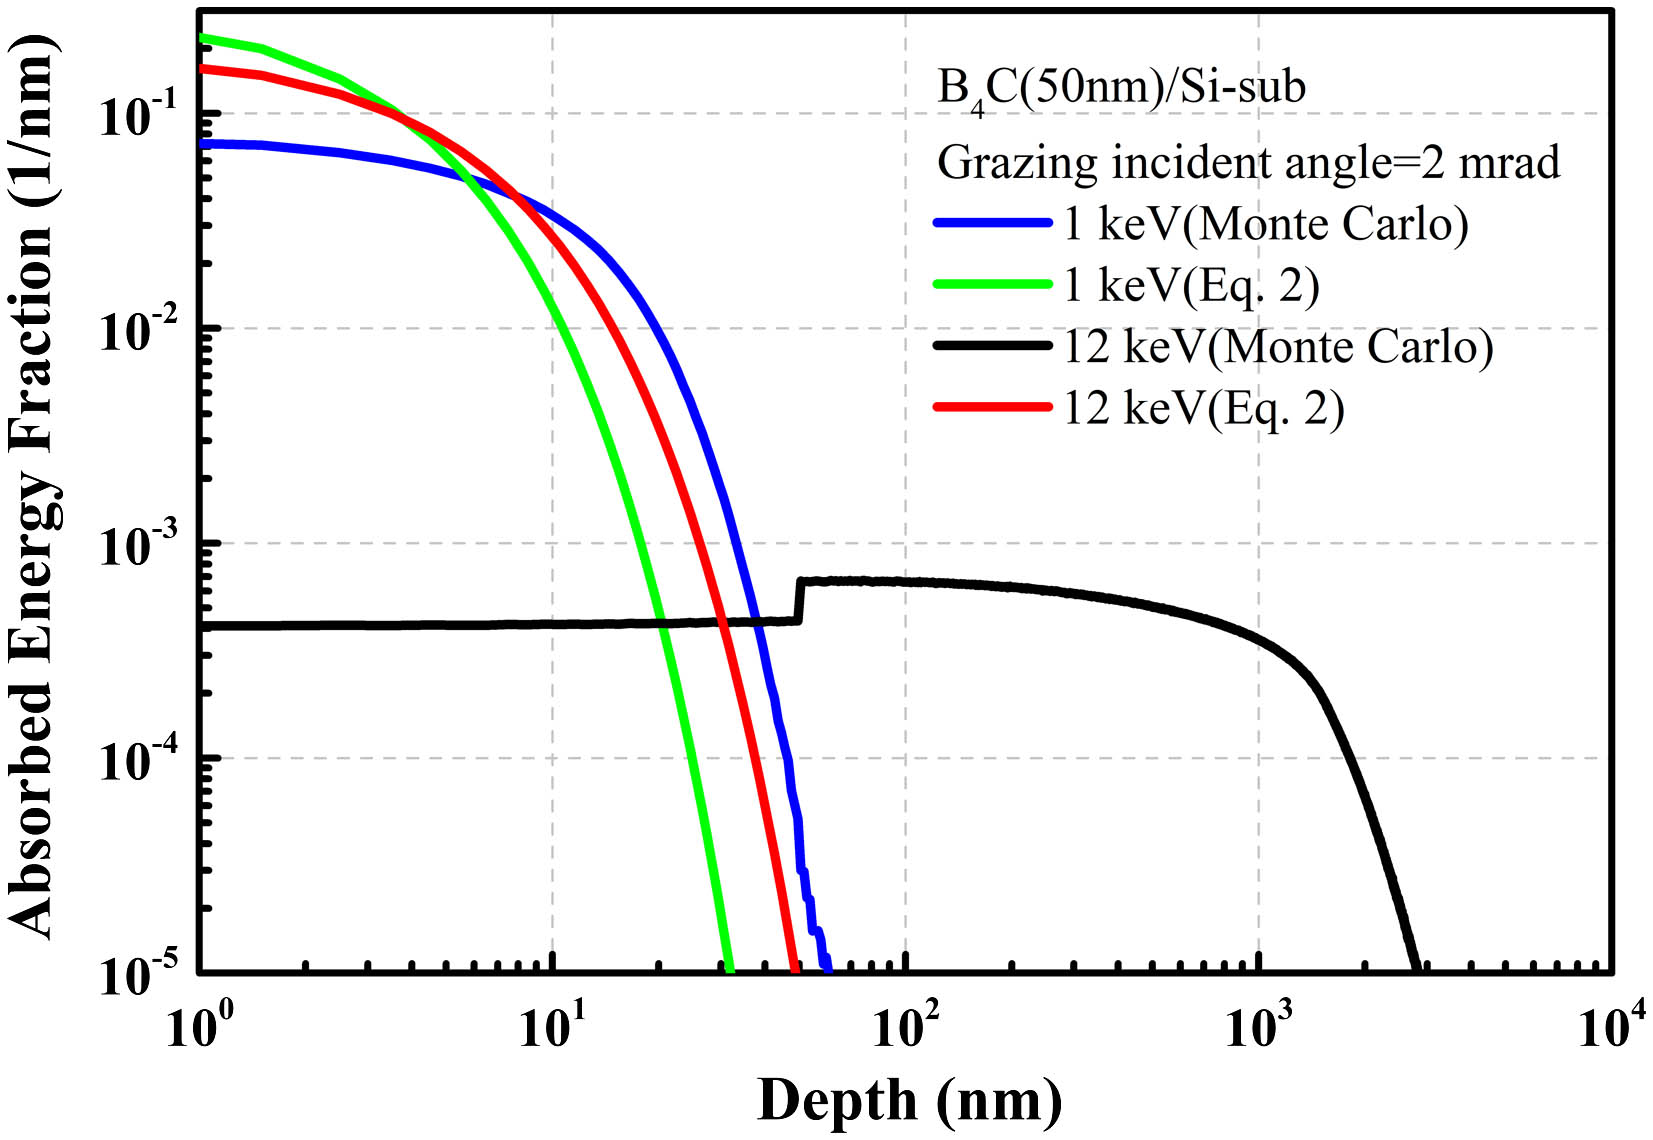 Absorbed energy fractions along the depth direction for B4C(50 nm)/Si-sub irradiated by XFEL at 1 keV and 12 keV with the grazing incidence angle of 2 mrad.